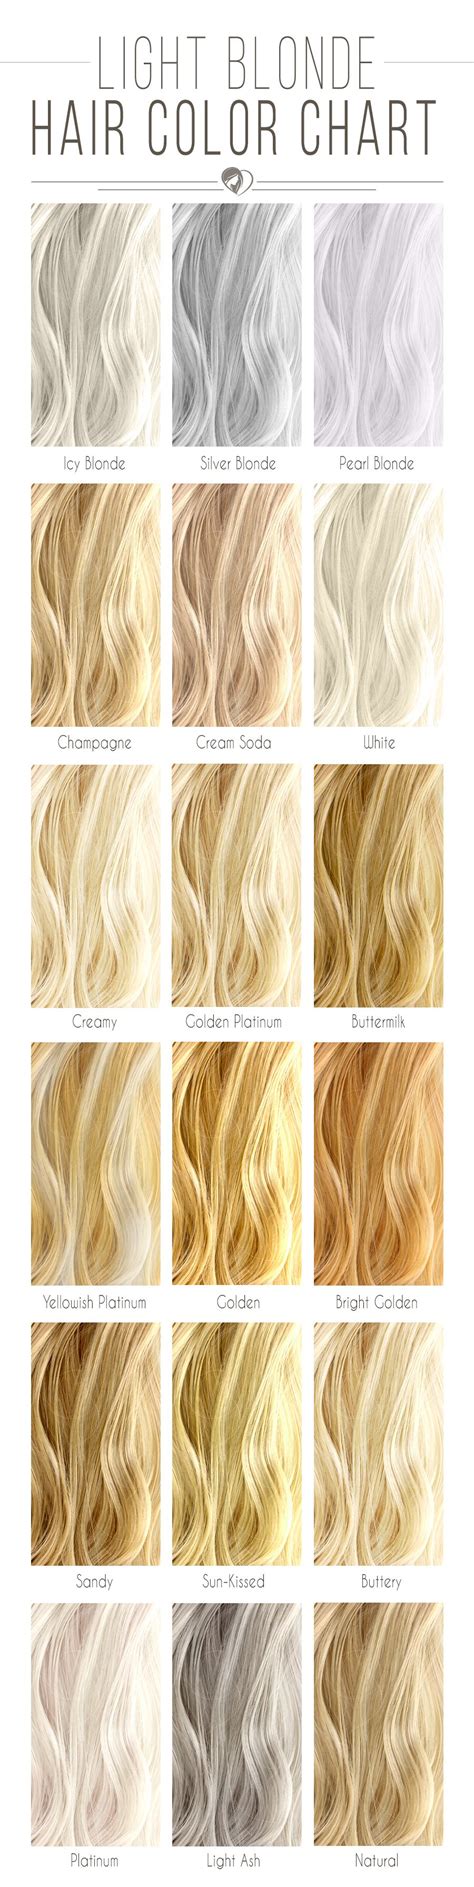 Hair Color Trendy Hair Color New Hair Colors White Hair Colors